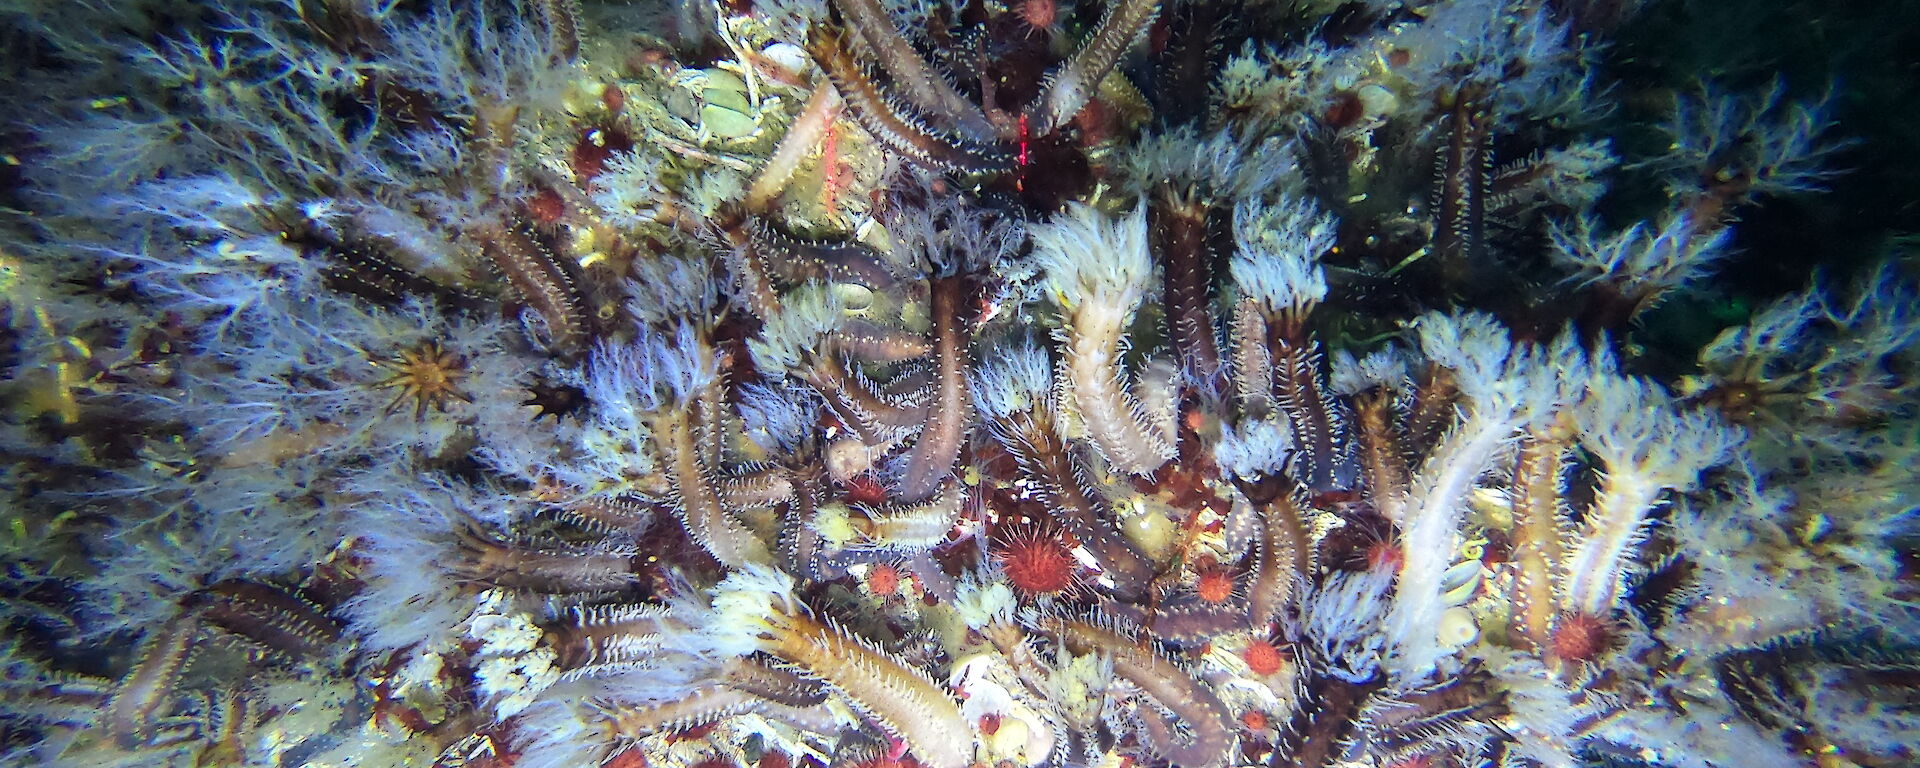 A large group of sea cucumbers on the sea floor.